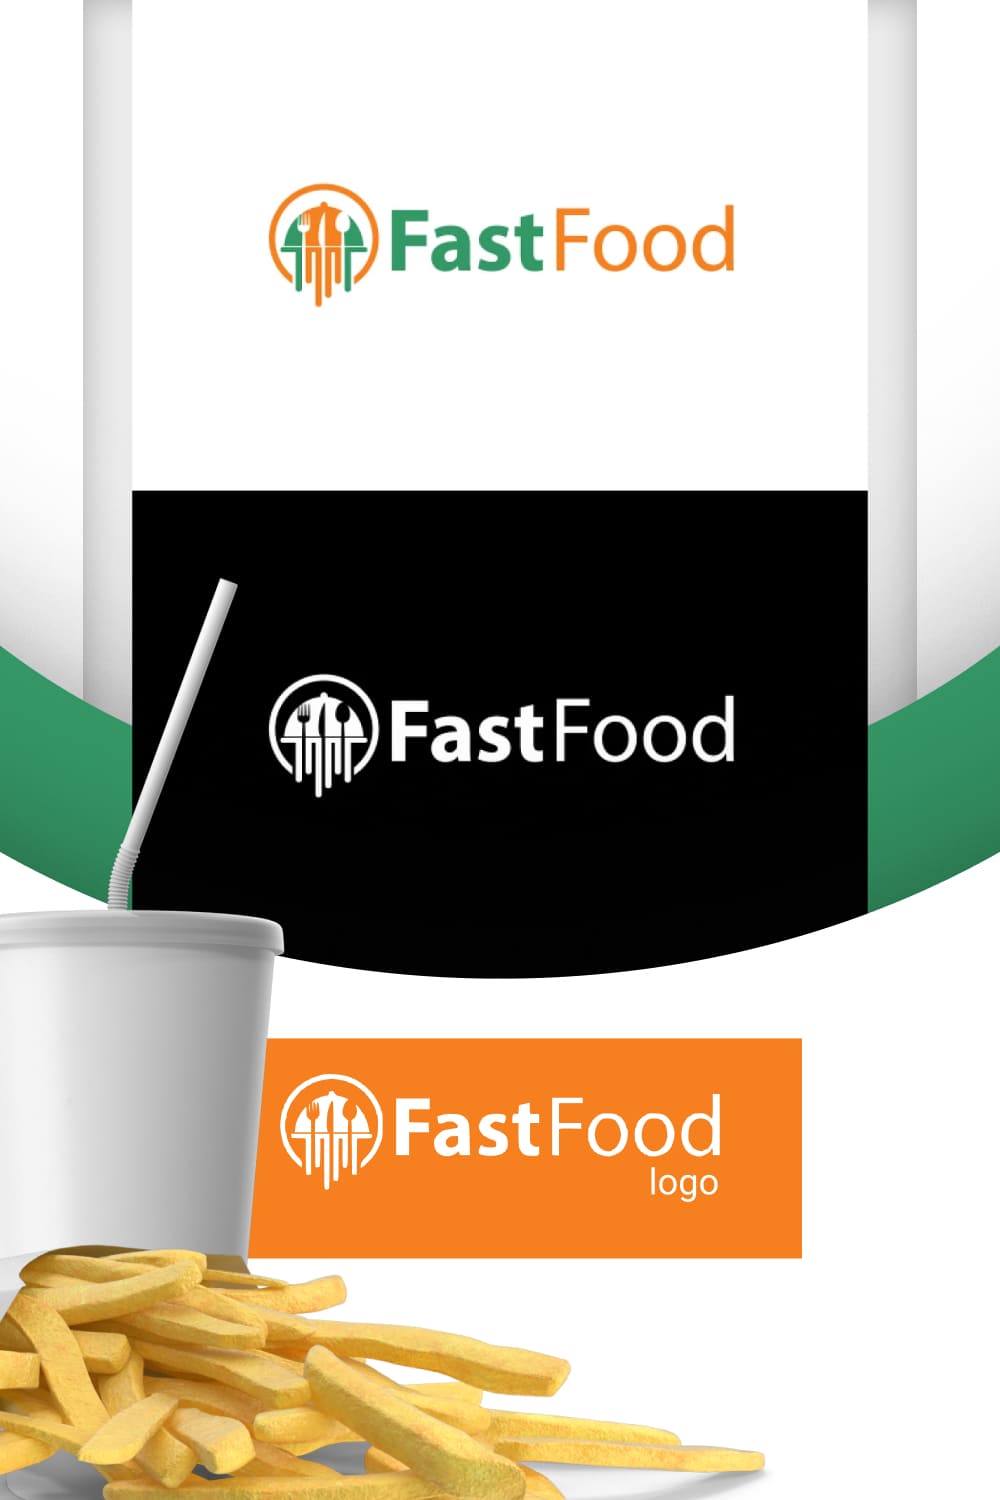 Stylish logos collection for fast food industries.